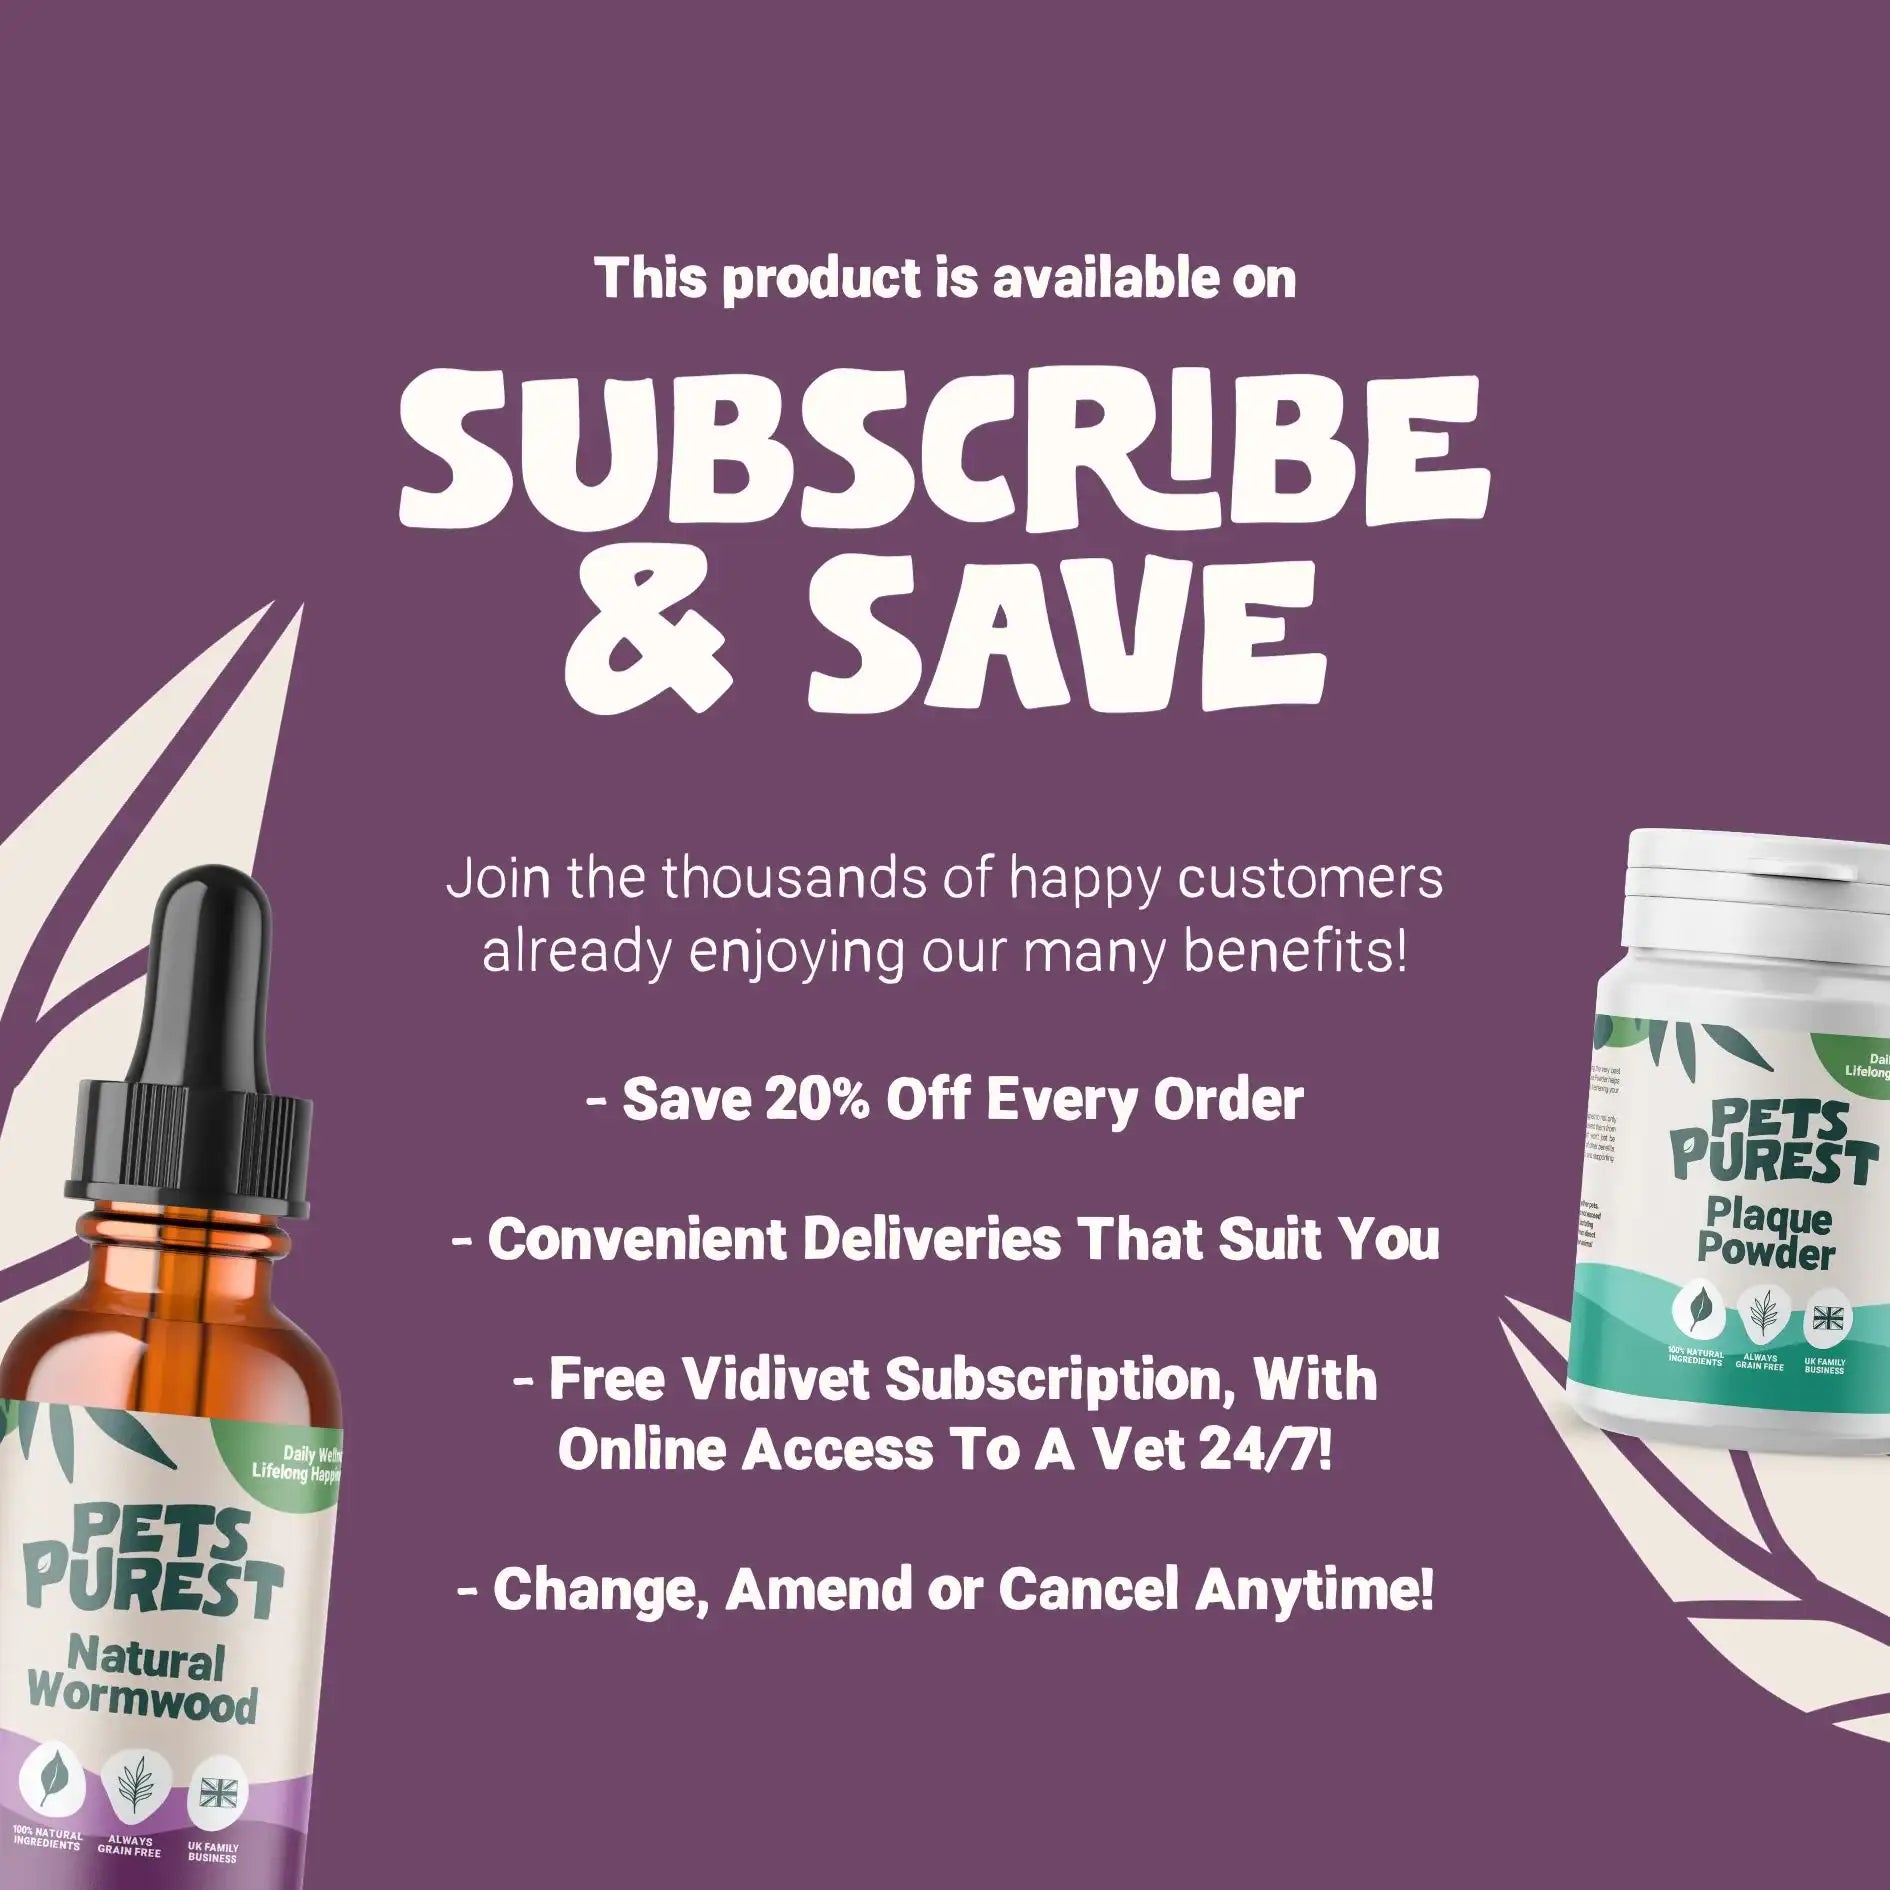 Subscribe & Save with Pets Purest